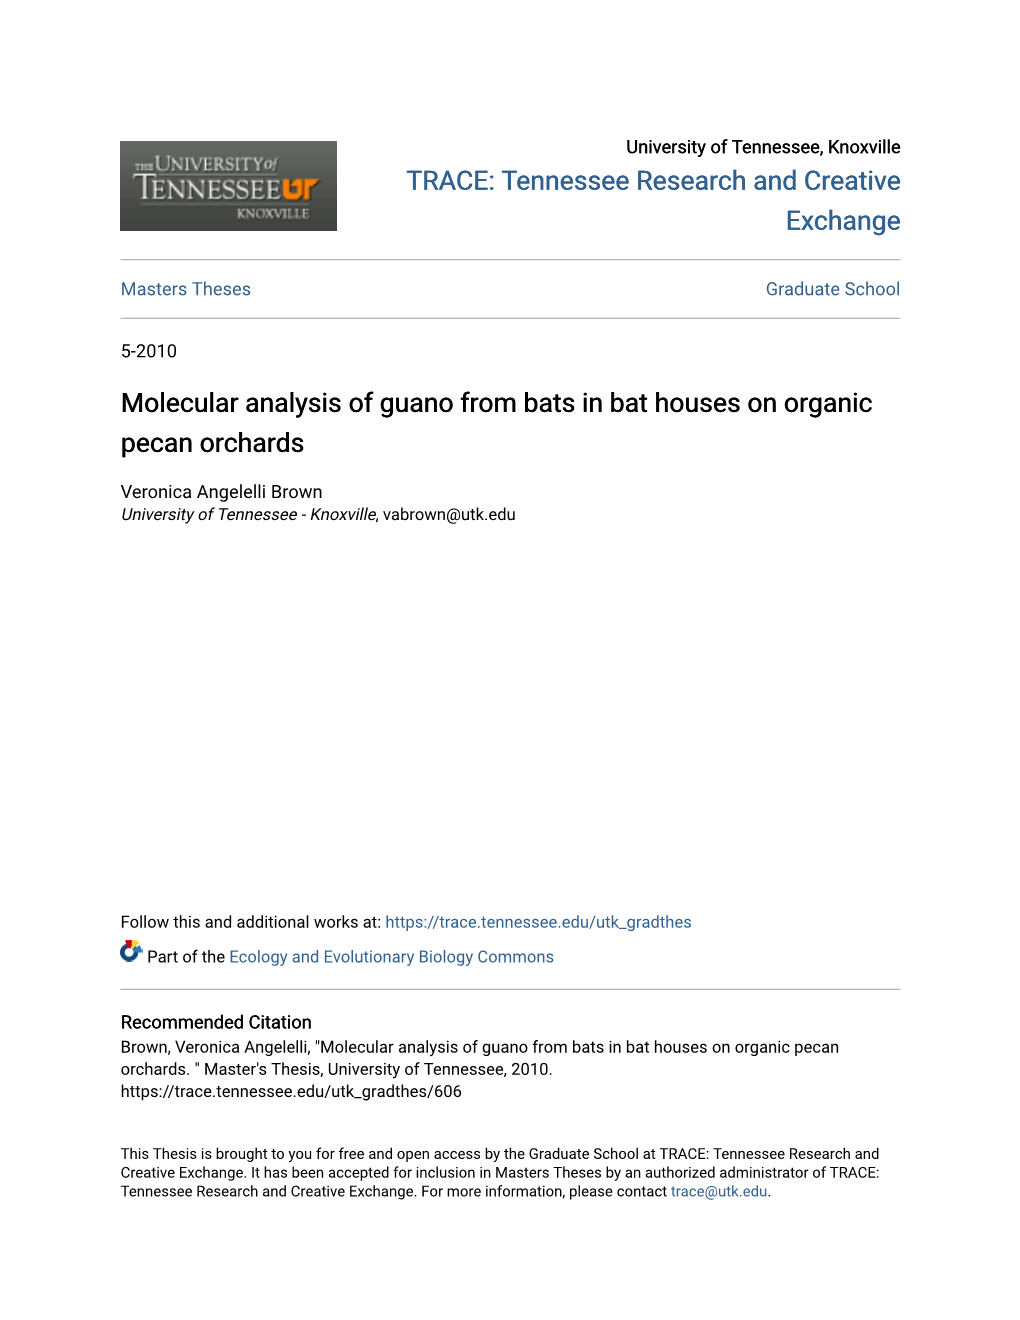 Molecular Analysis of Guano from Bats in Bat Houses on Organic Pecan Orchards